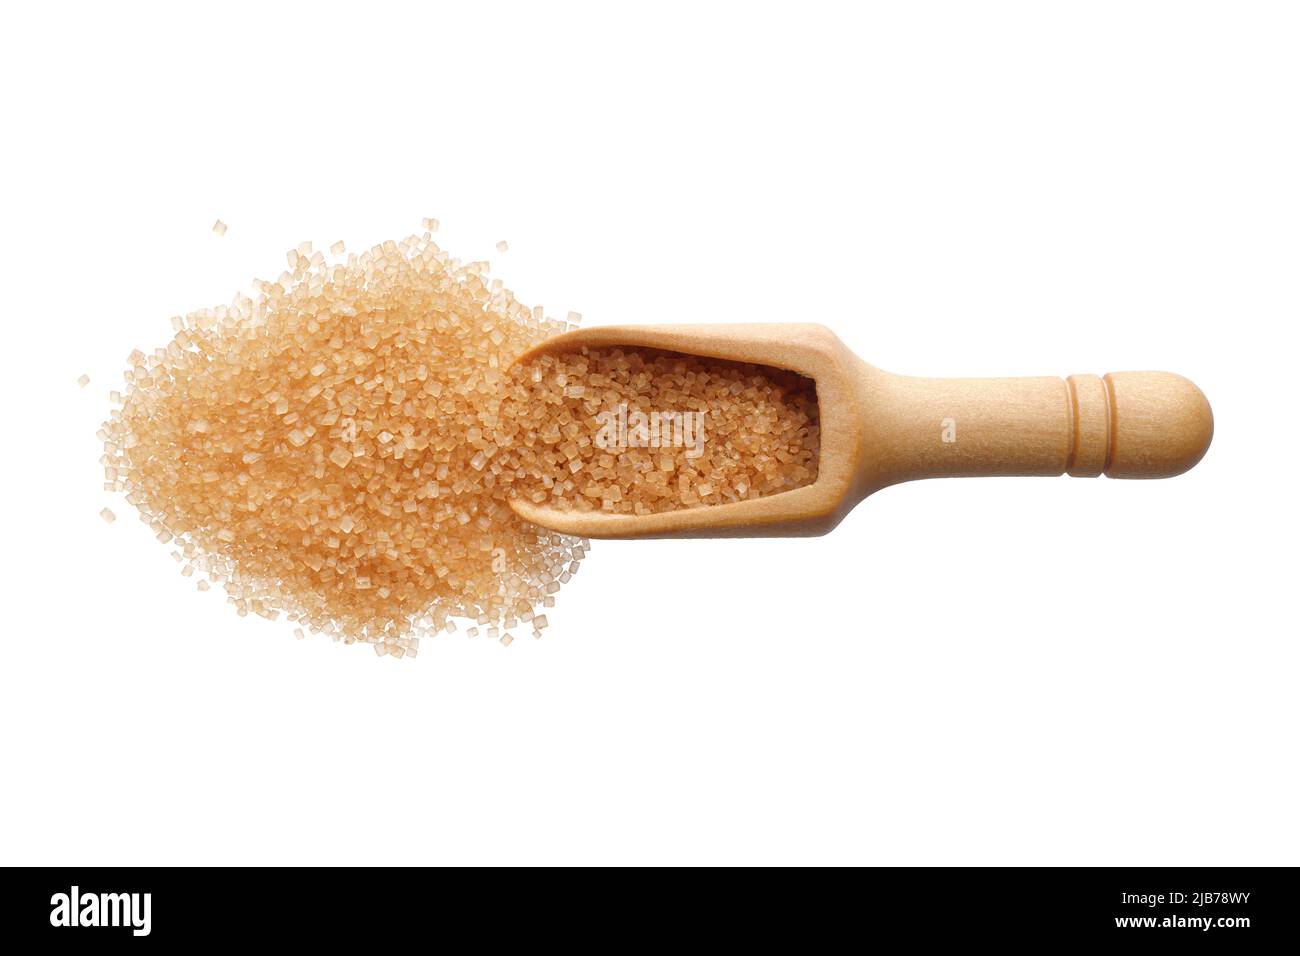 Food ingredients: heap of cane sugar demerara in a wooden scoop, isolated on white background Stock Photo